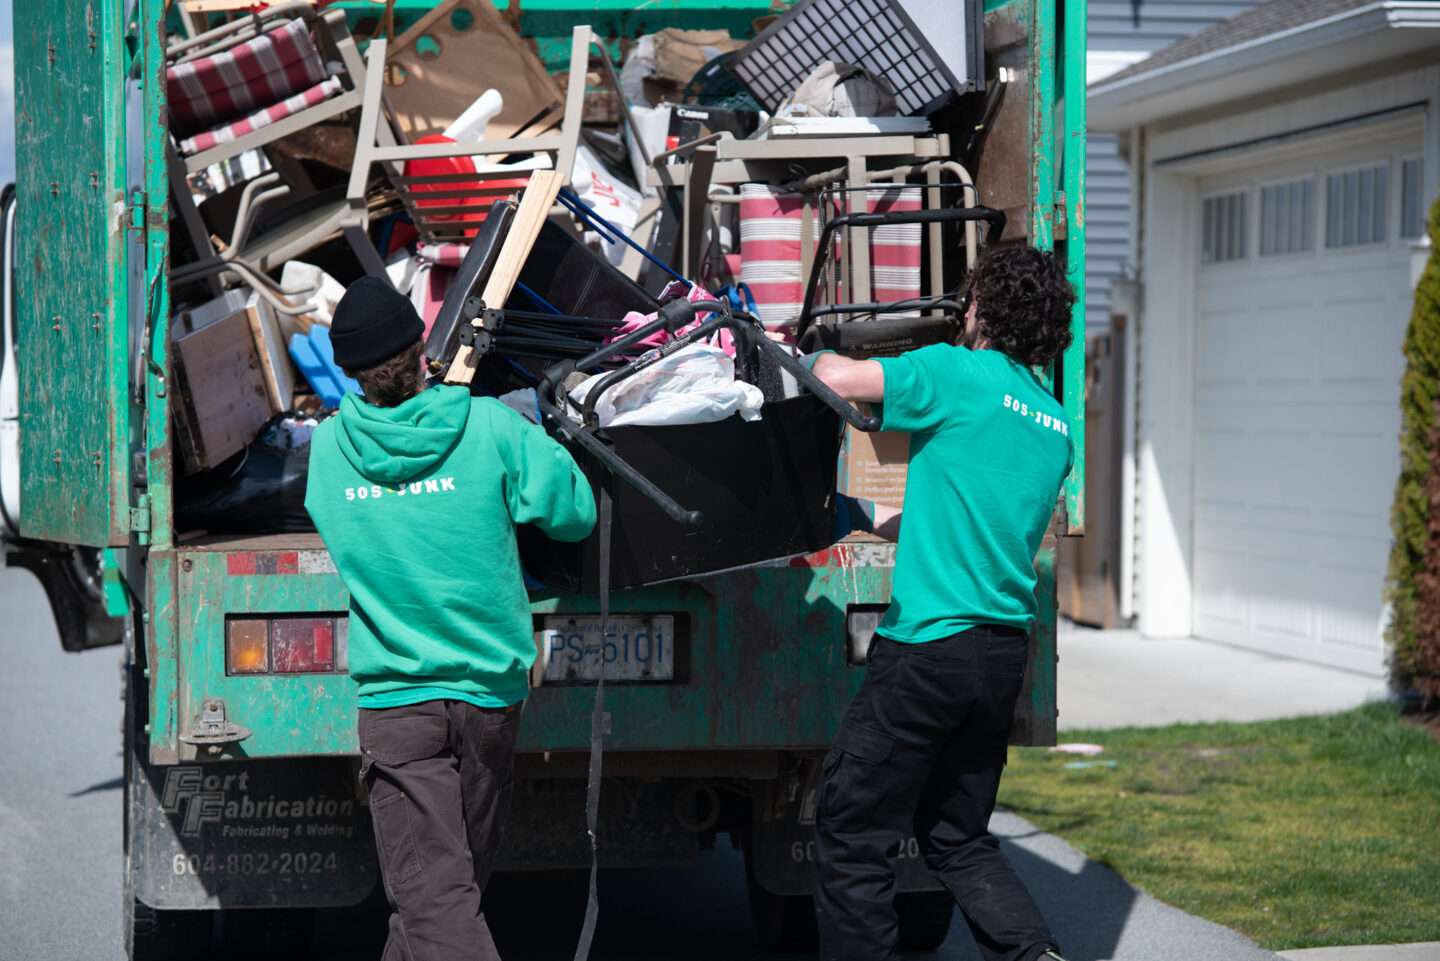 Two 505-Junk employees loading unwanted items into the truck during a rubbish removal in Delta.